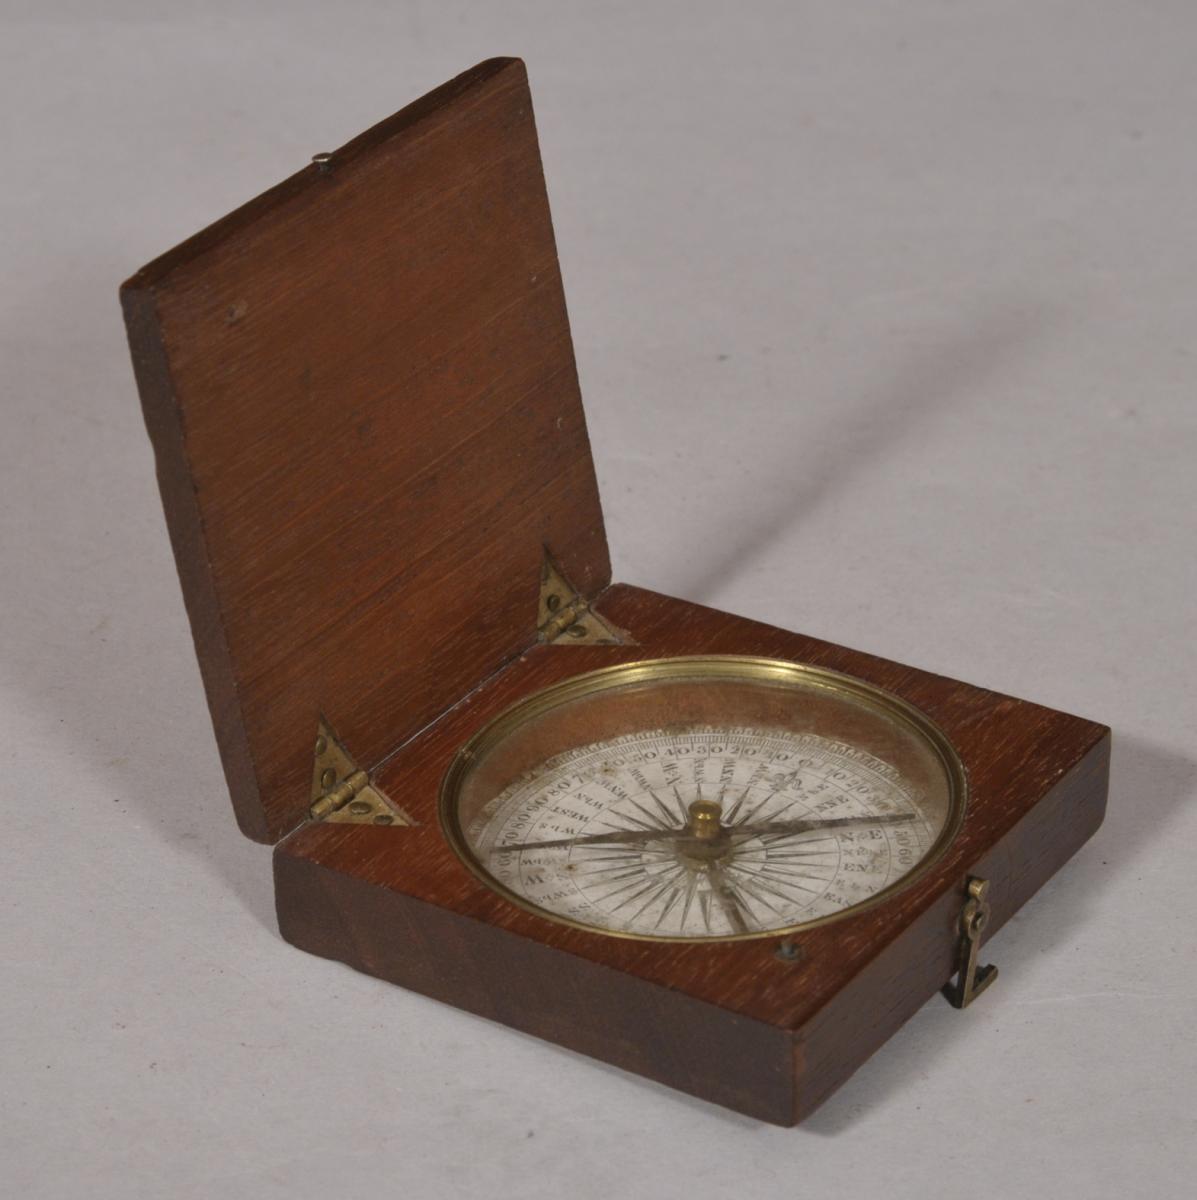 S/5403 Antique 19th Century Mahogany Cased Travelling or Explorer's Compass